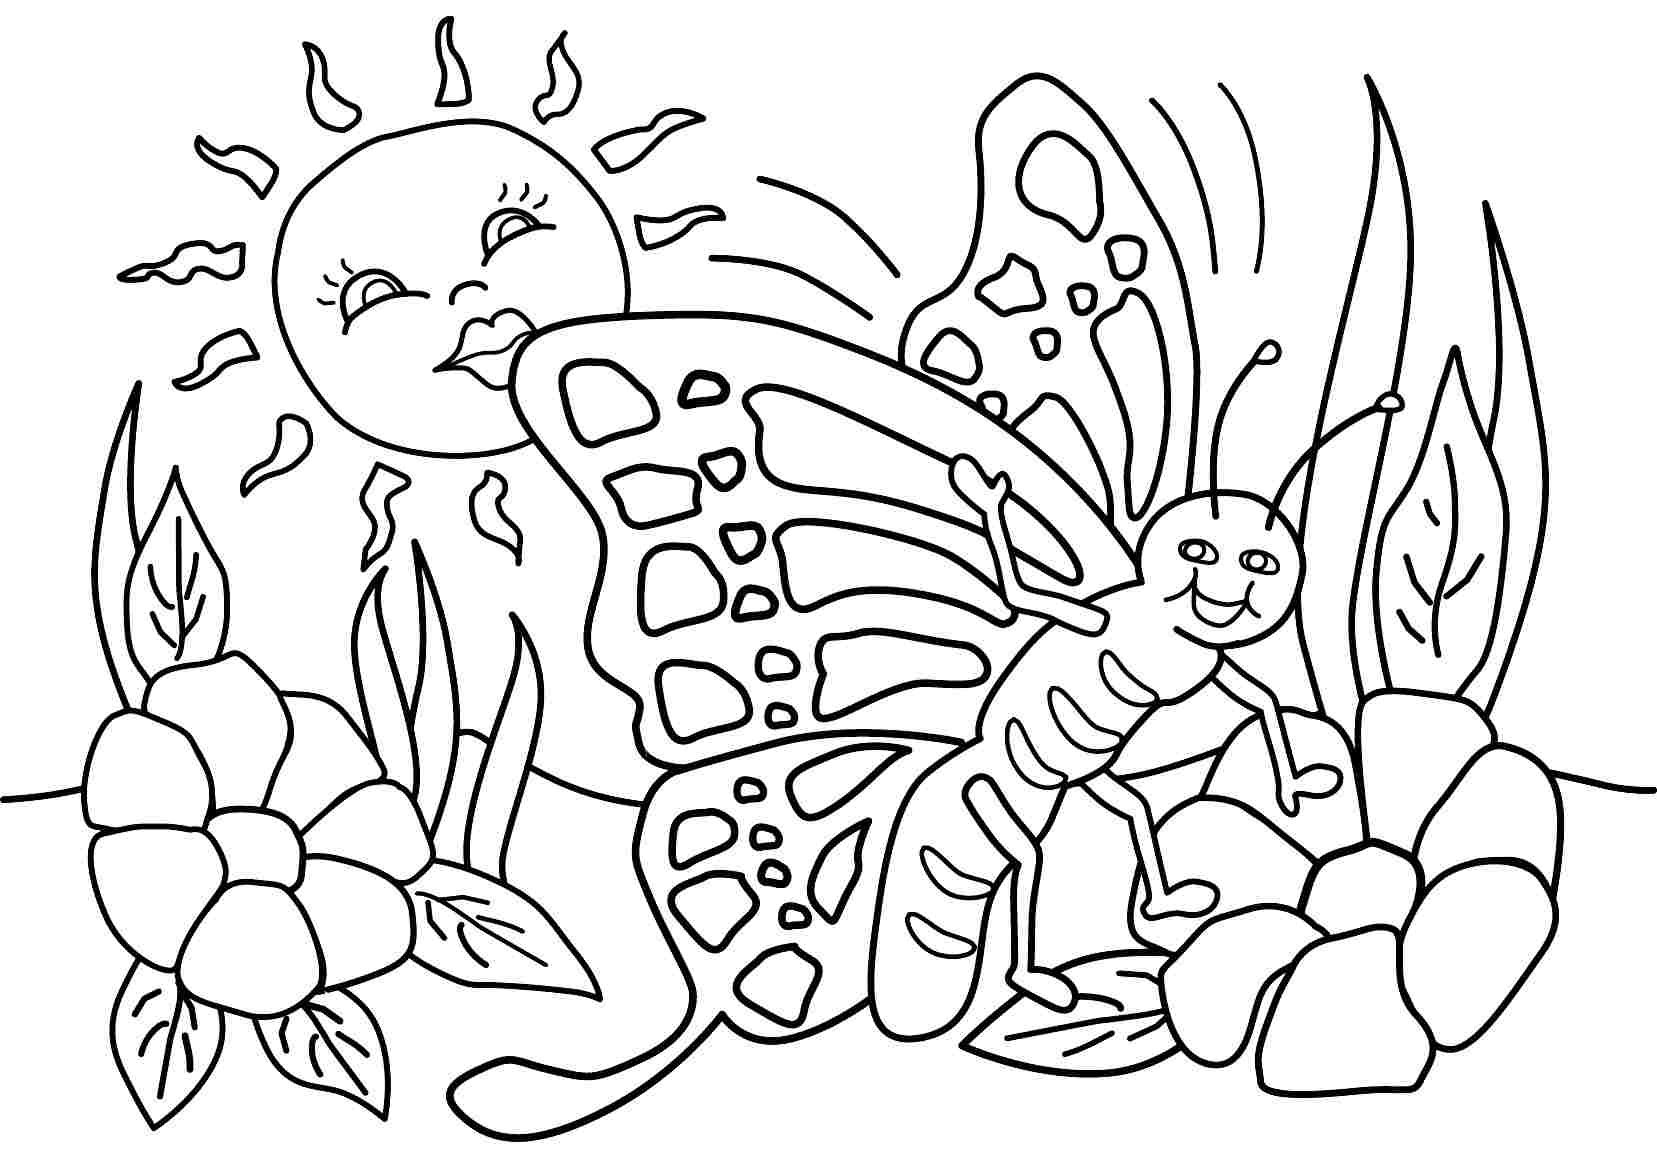 5 Best Images of Spring Season Coloring Pages Printable - Spring